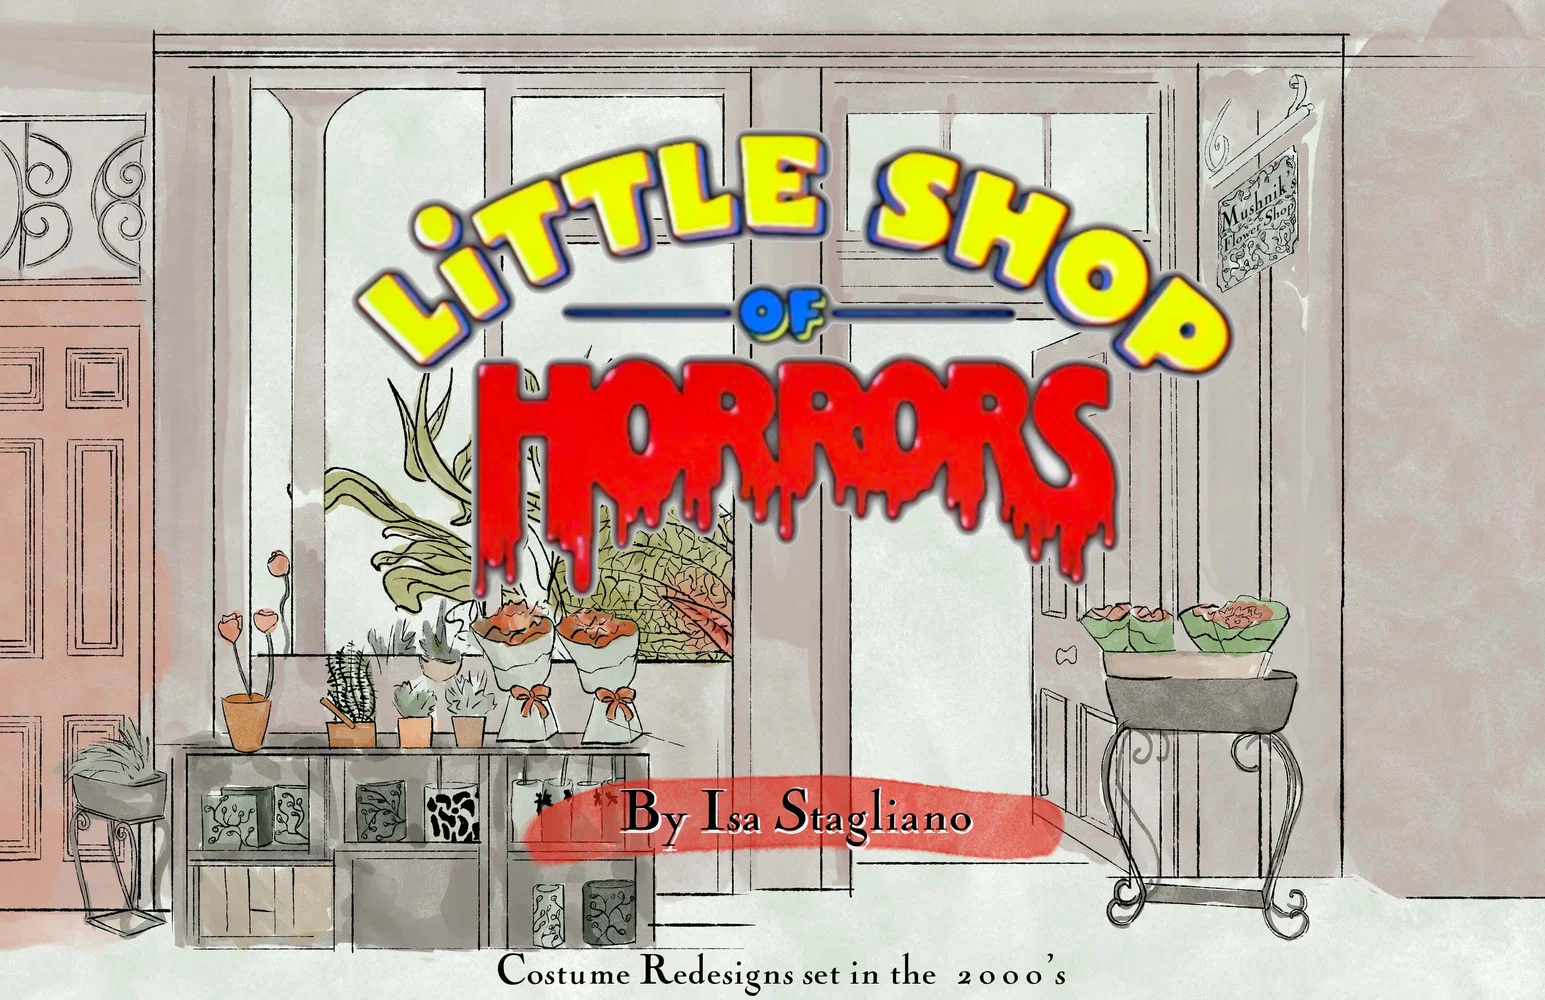 Title Page reading "Little Shop of Horrors" By Isa Stagliano. In smaller text beneath the title there is black text that reads "Costume Redesigns set in the 2000's